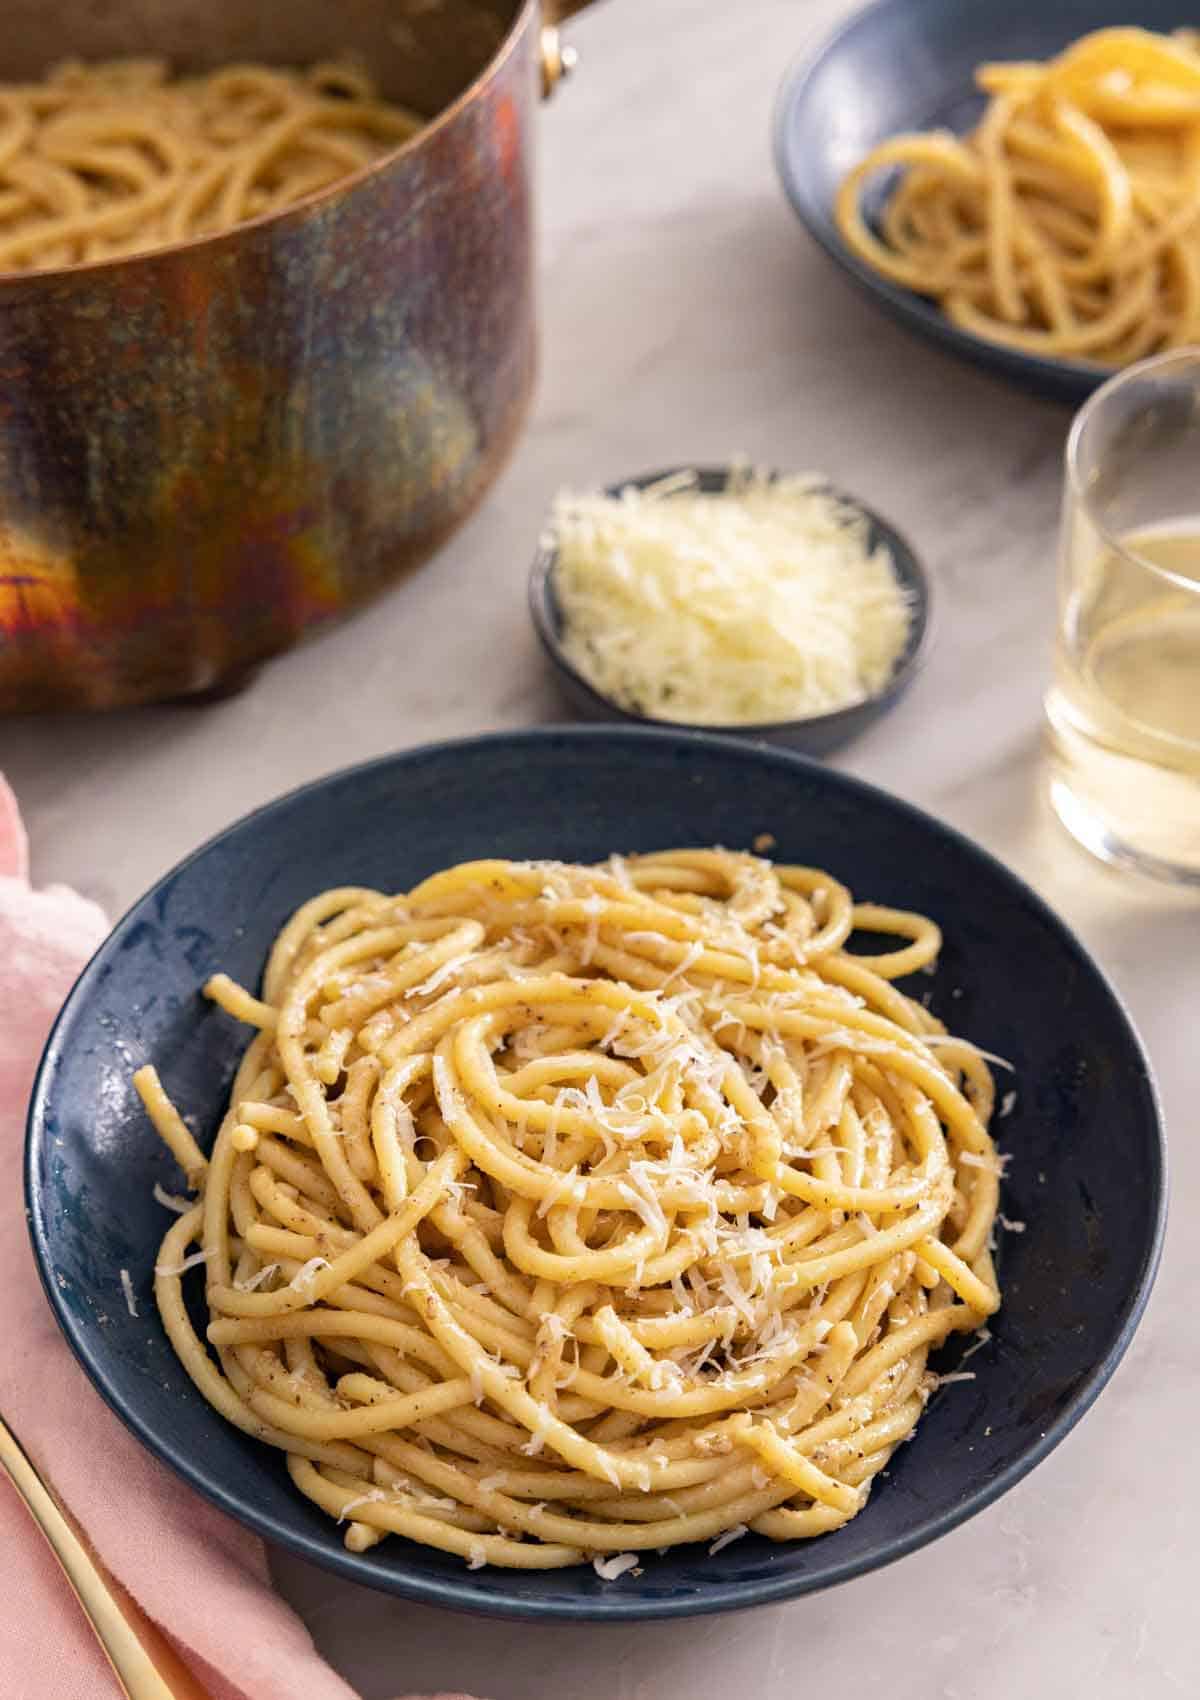 A plate with cacio e pepe with grated cheese and more noodles in the background.